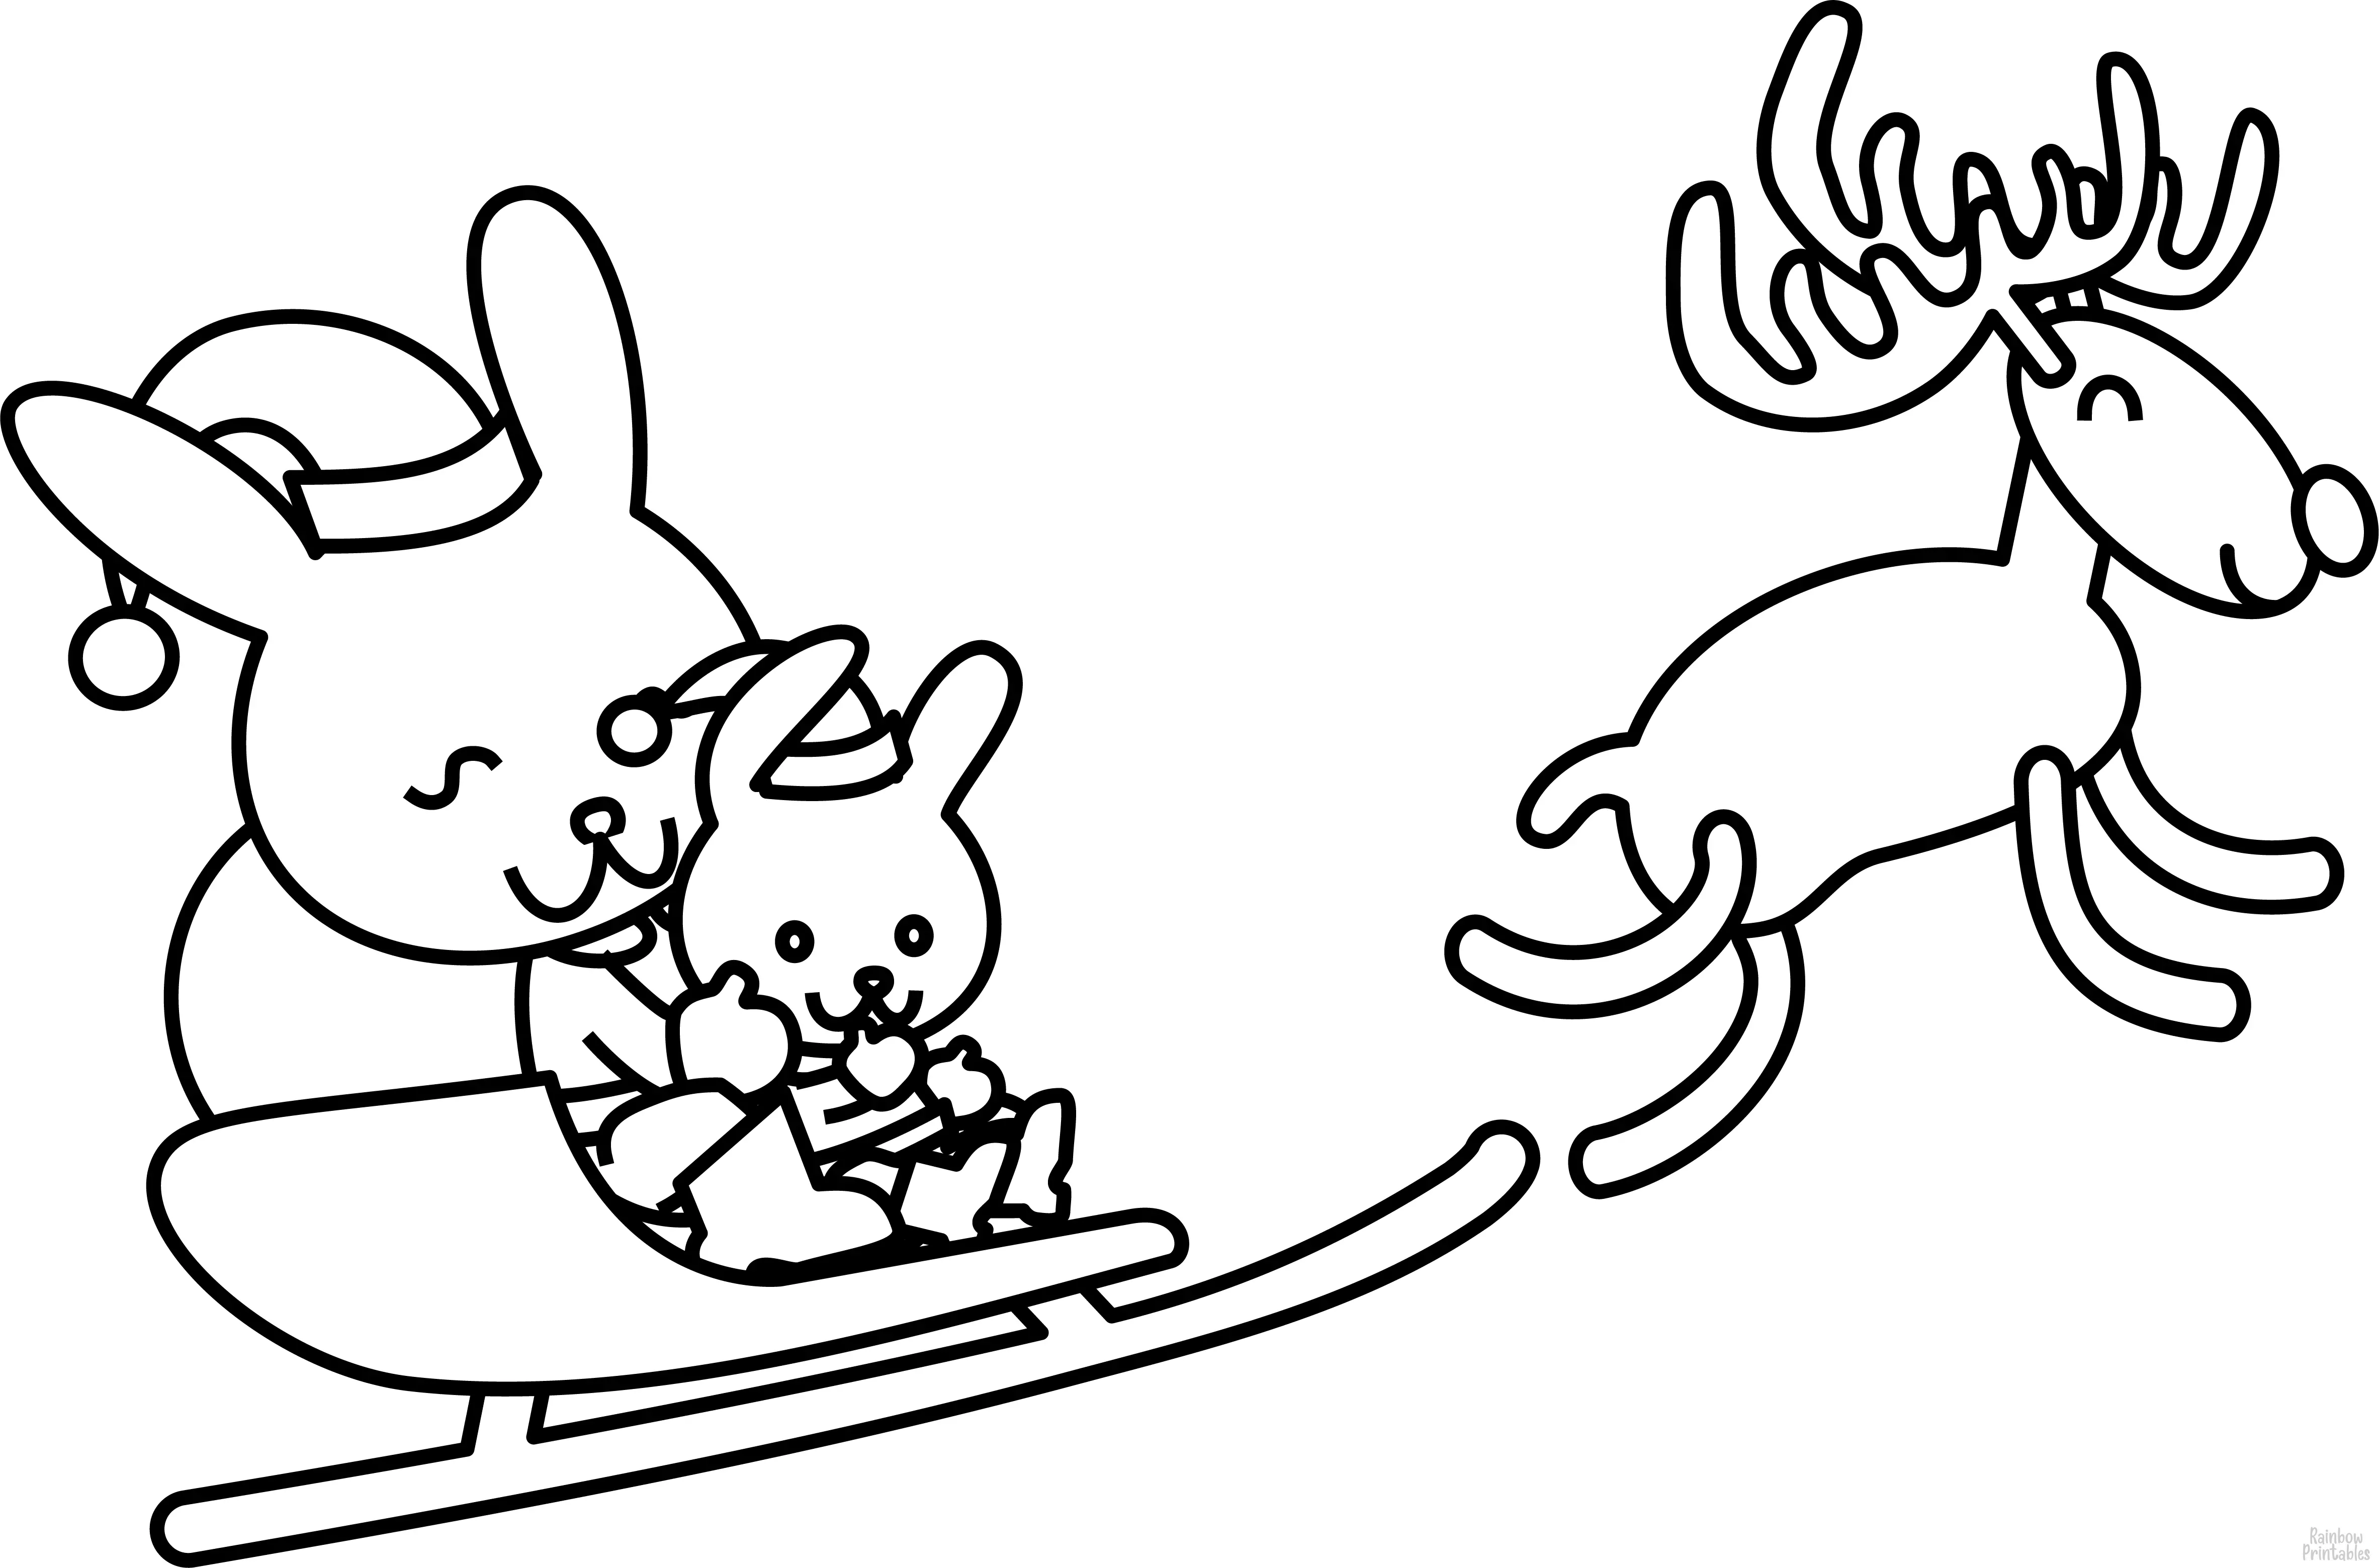 Bunny Santa Riding on Sled with Flying Reindeer Coloring Book Page Sheets for Kids Activity